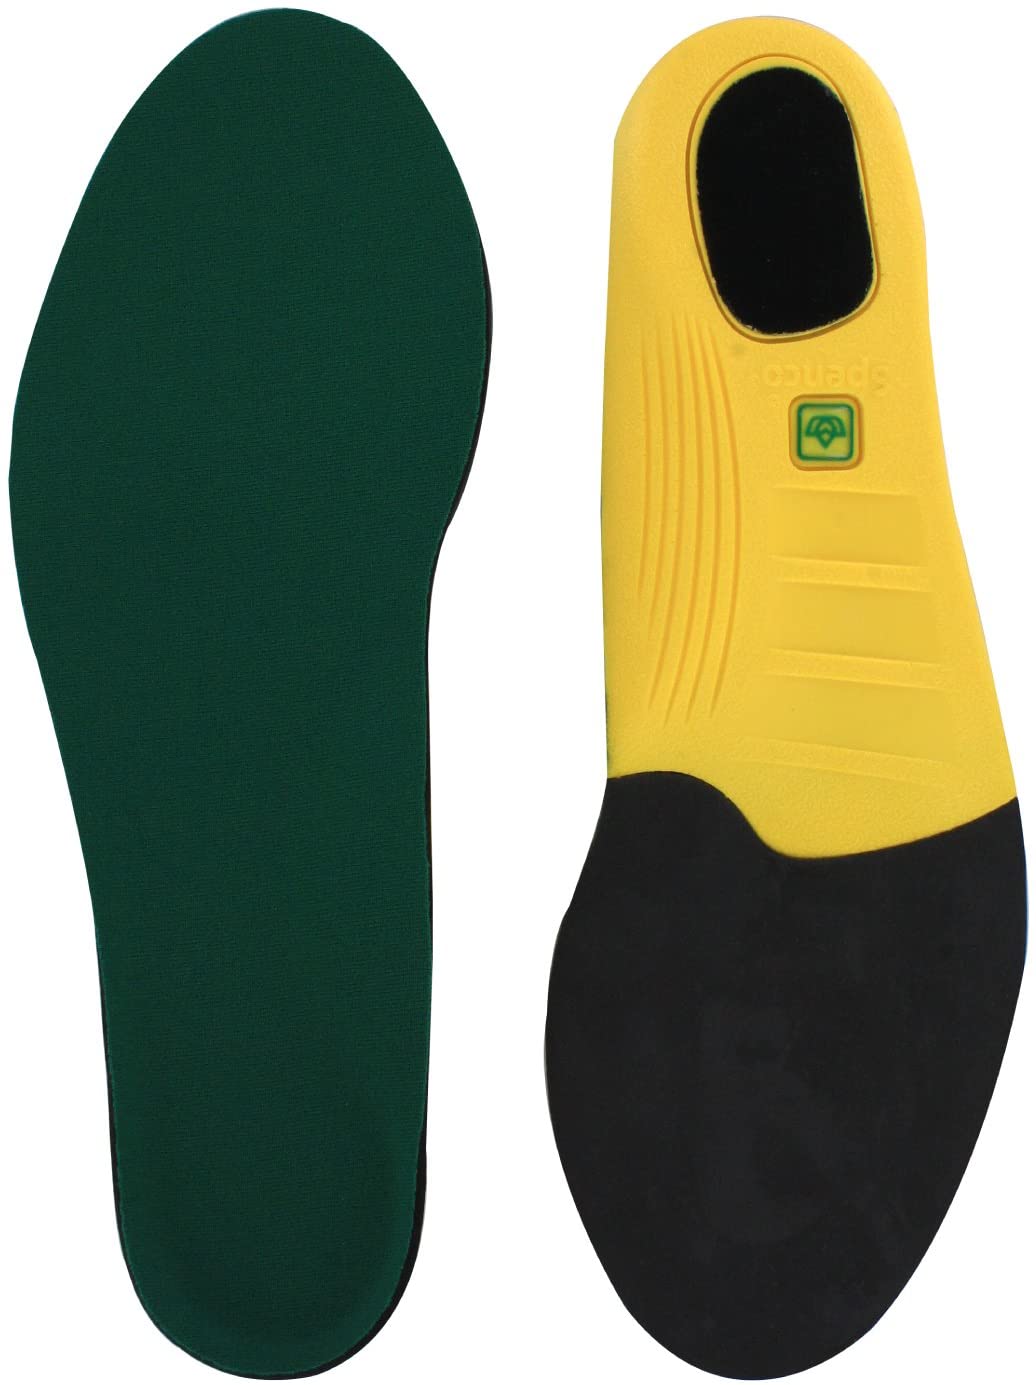 insoles for cleats